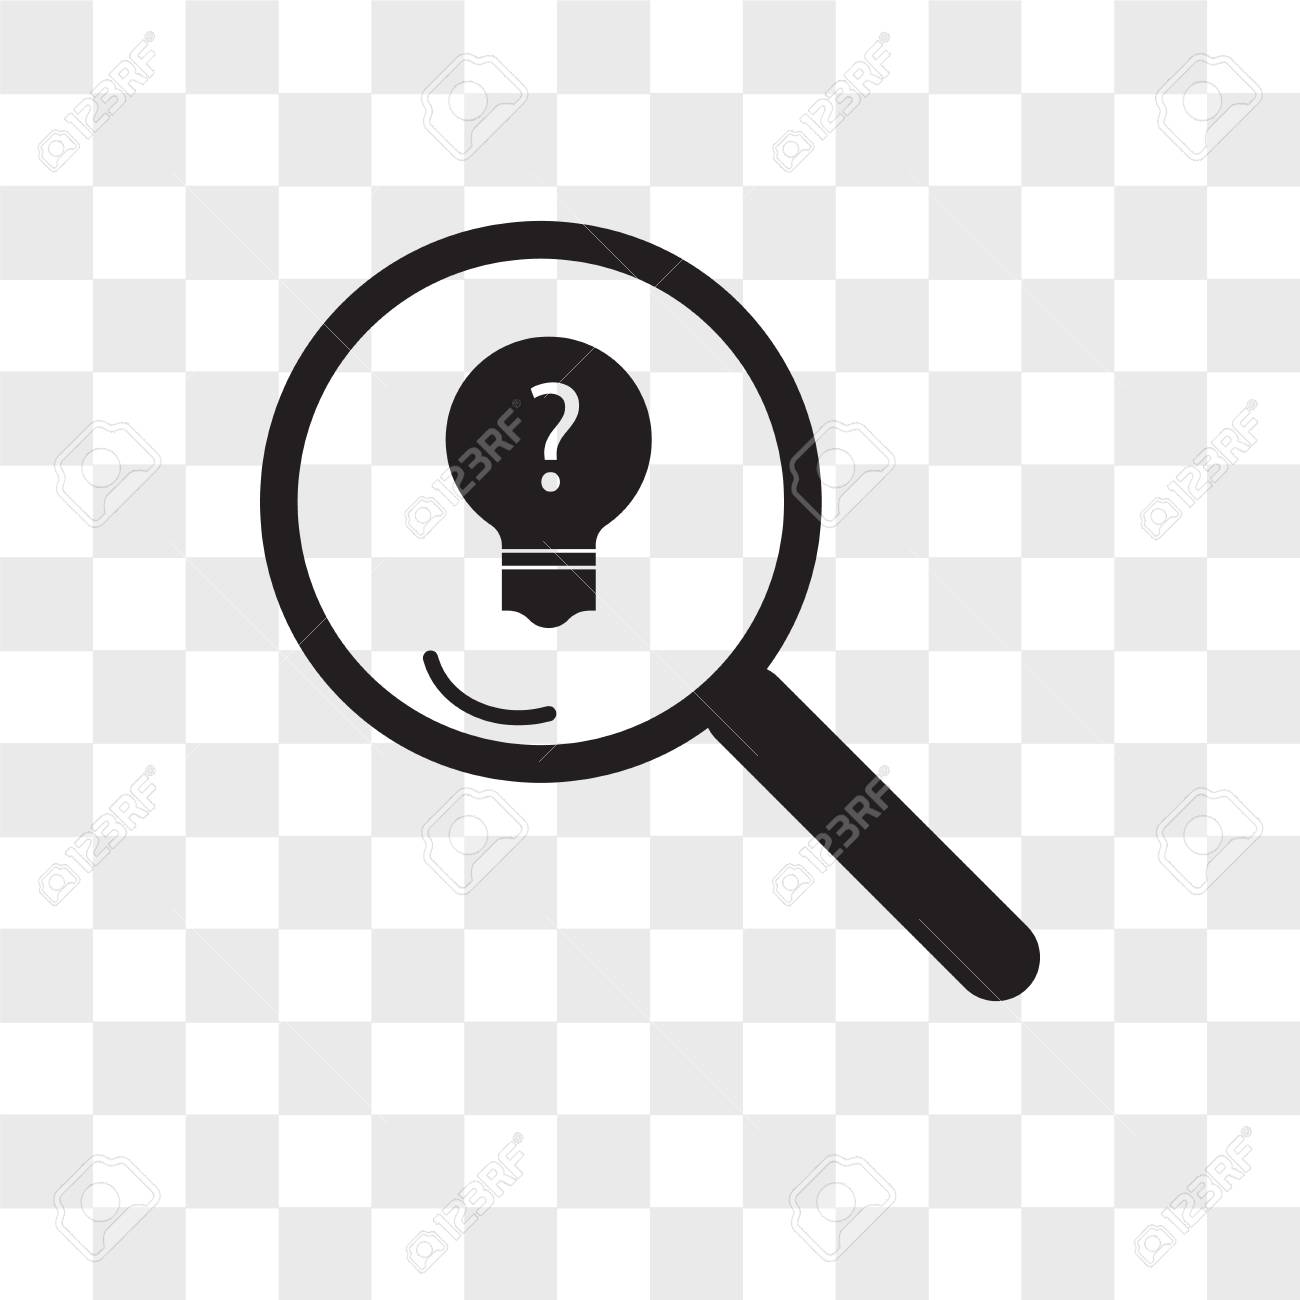 Curiosity Vector Icon Isolated On Transparent Background